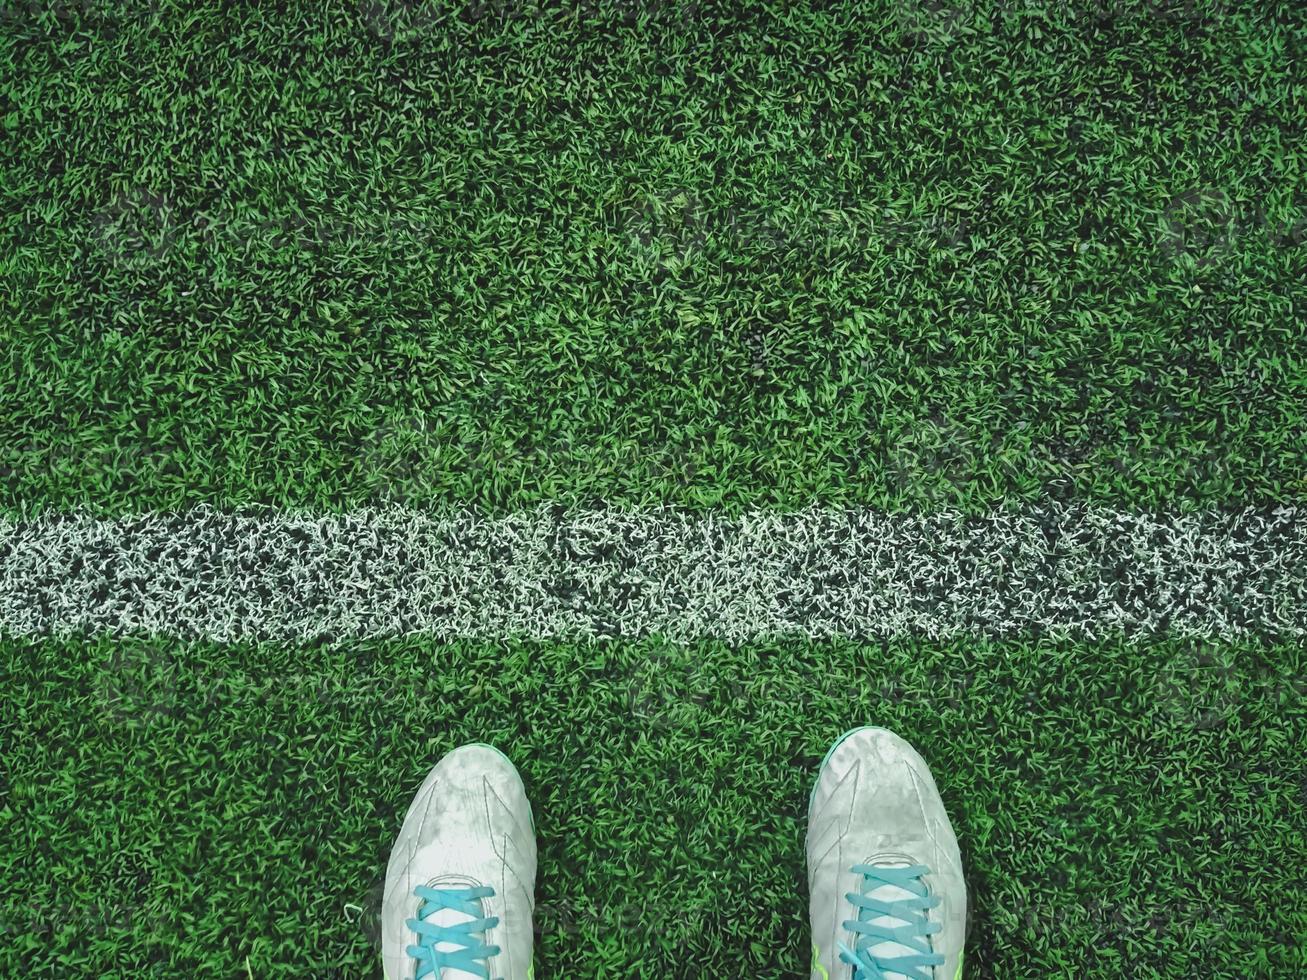 Artificial grass with shoes and white lines photo